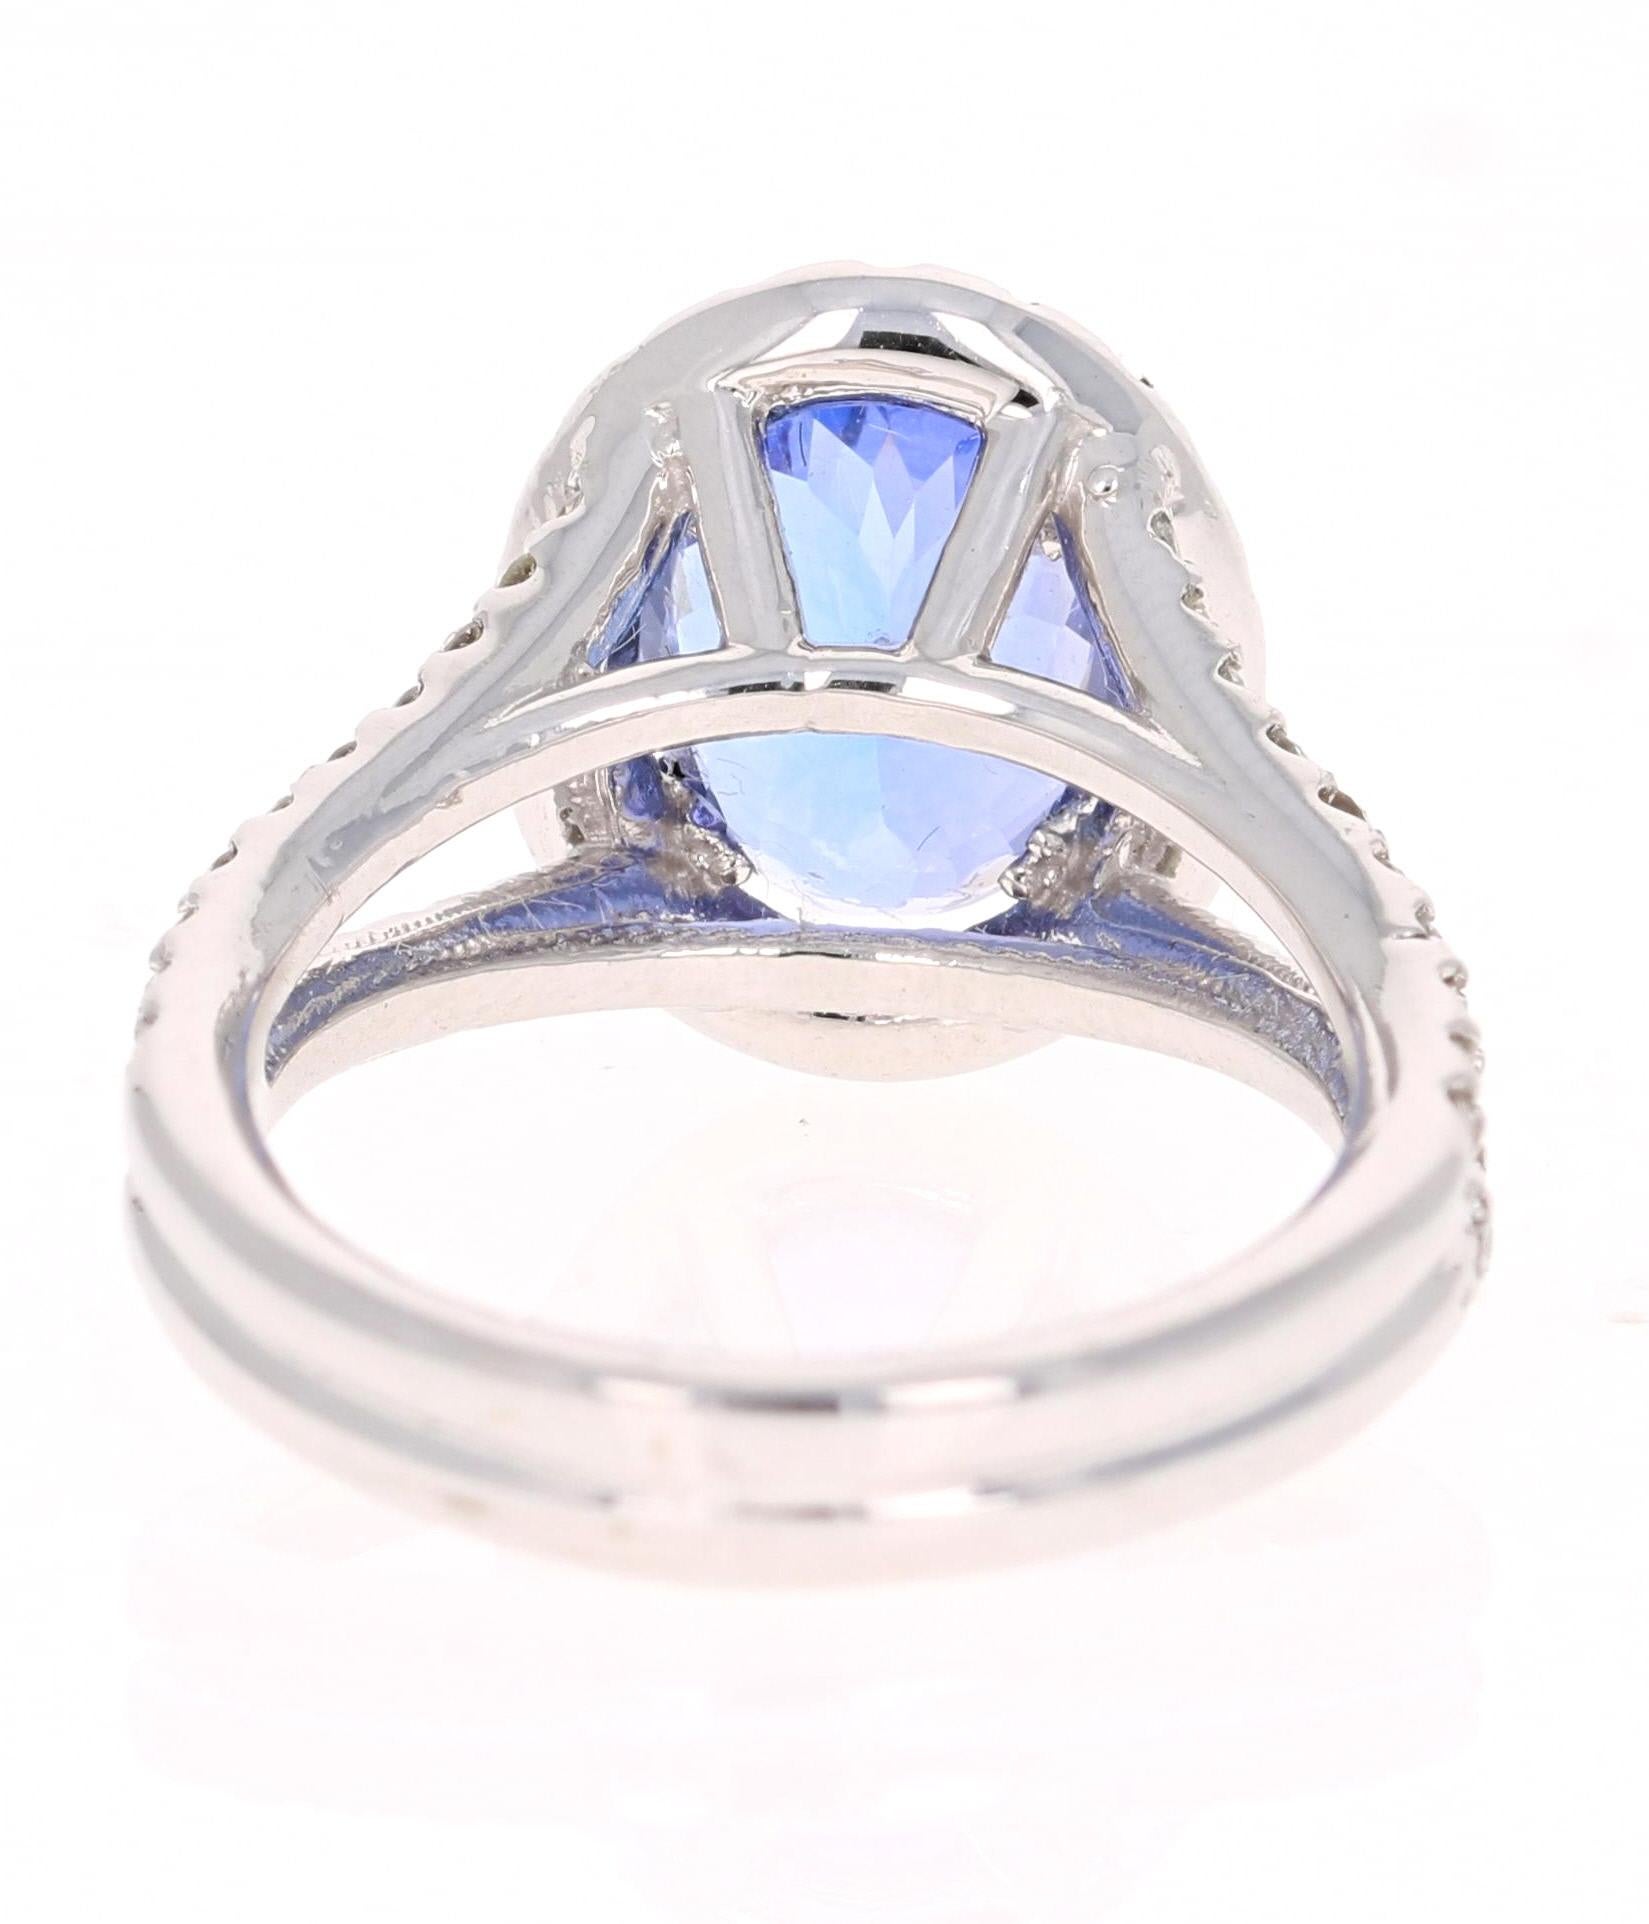 Oval Cut Tanzanite Diamond White Gold Engagement Ring For Sale